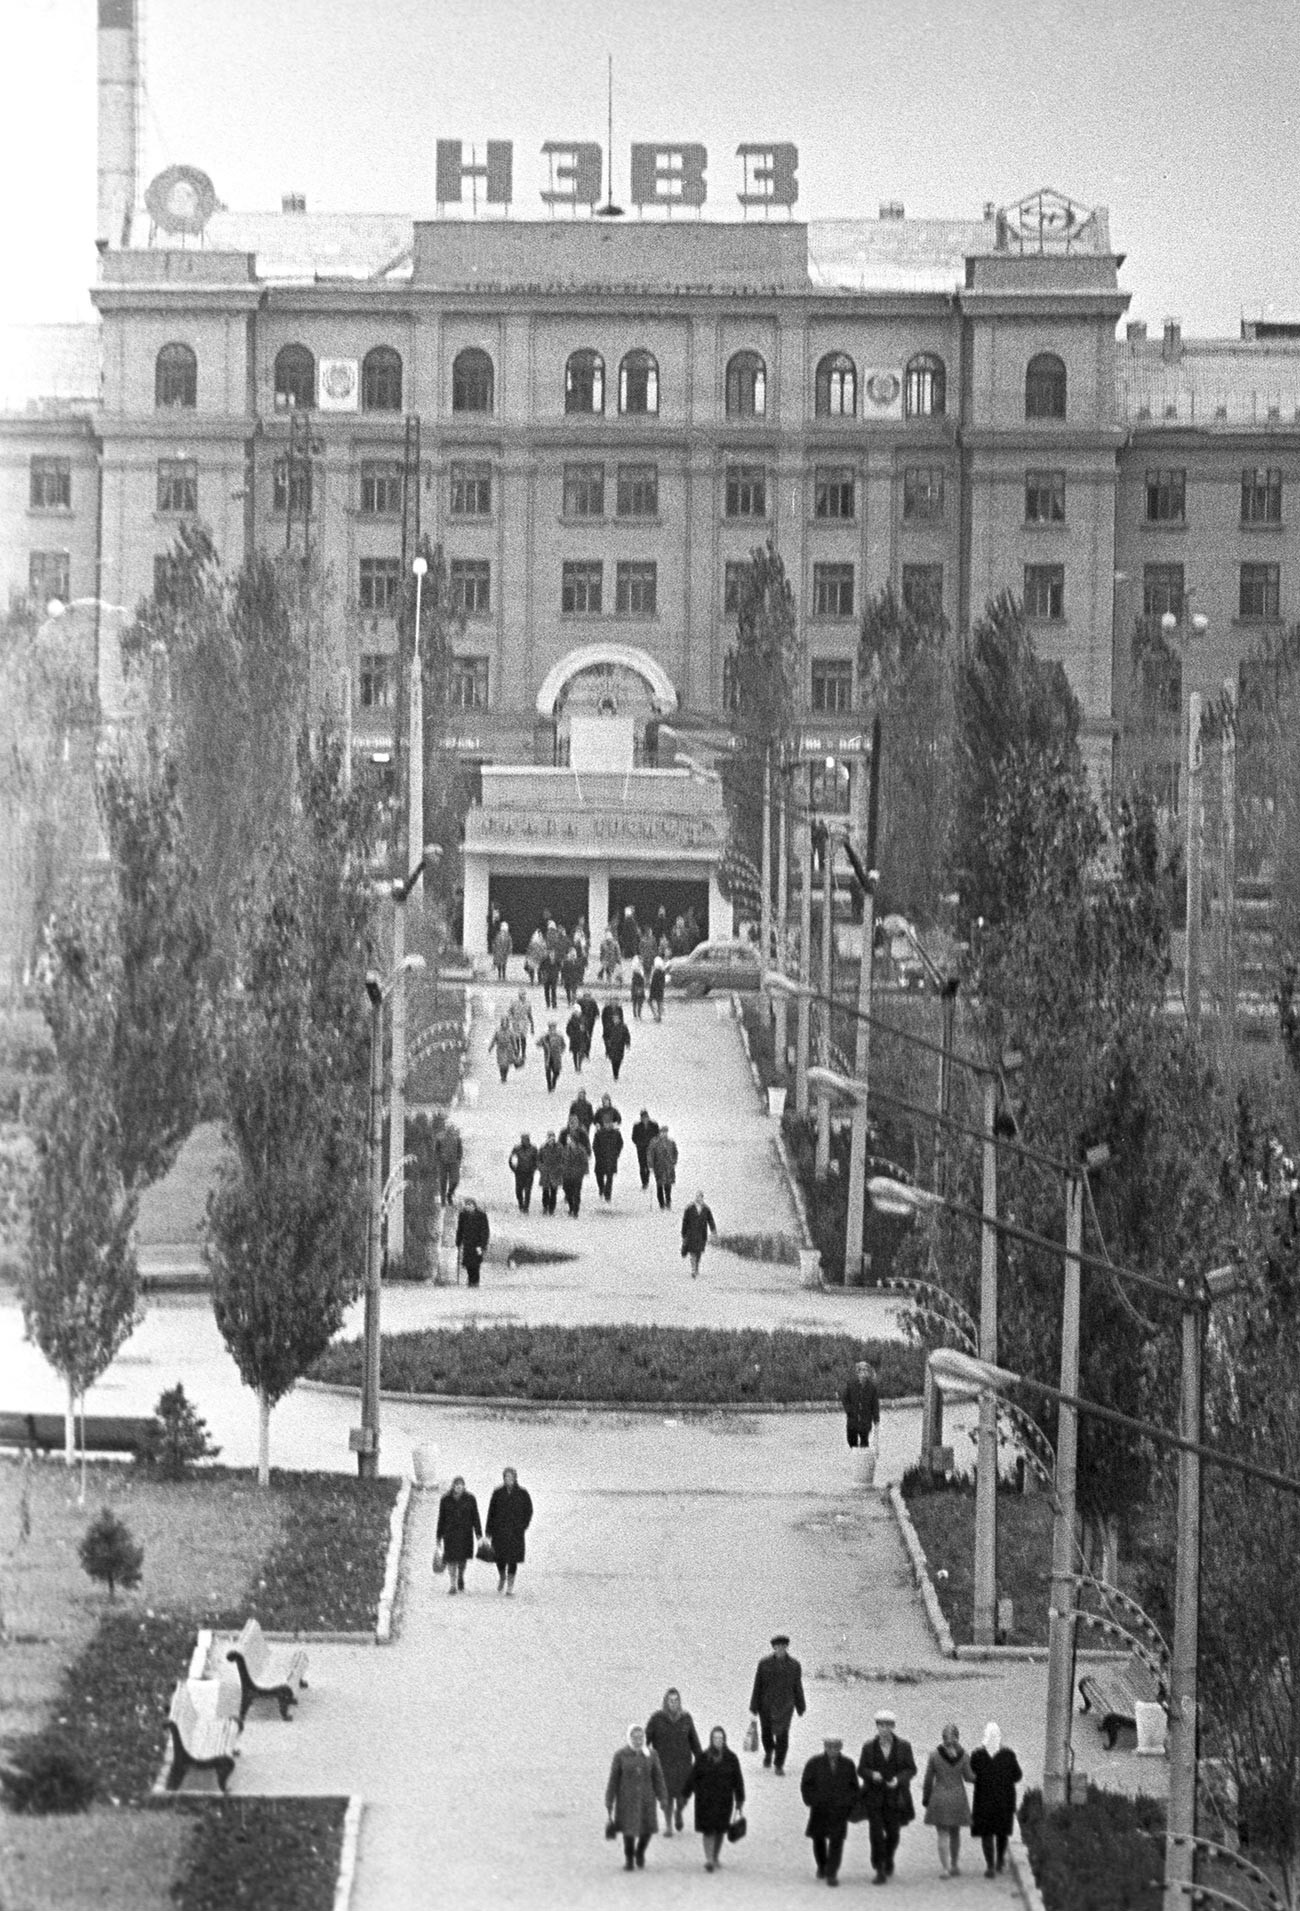 The Novocherkassk Electric Locomotive Plant's main perspective and public garden, where the strike began 